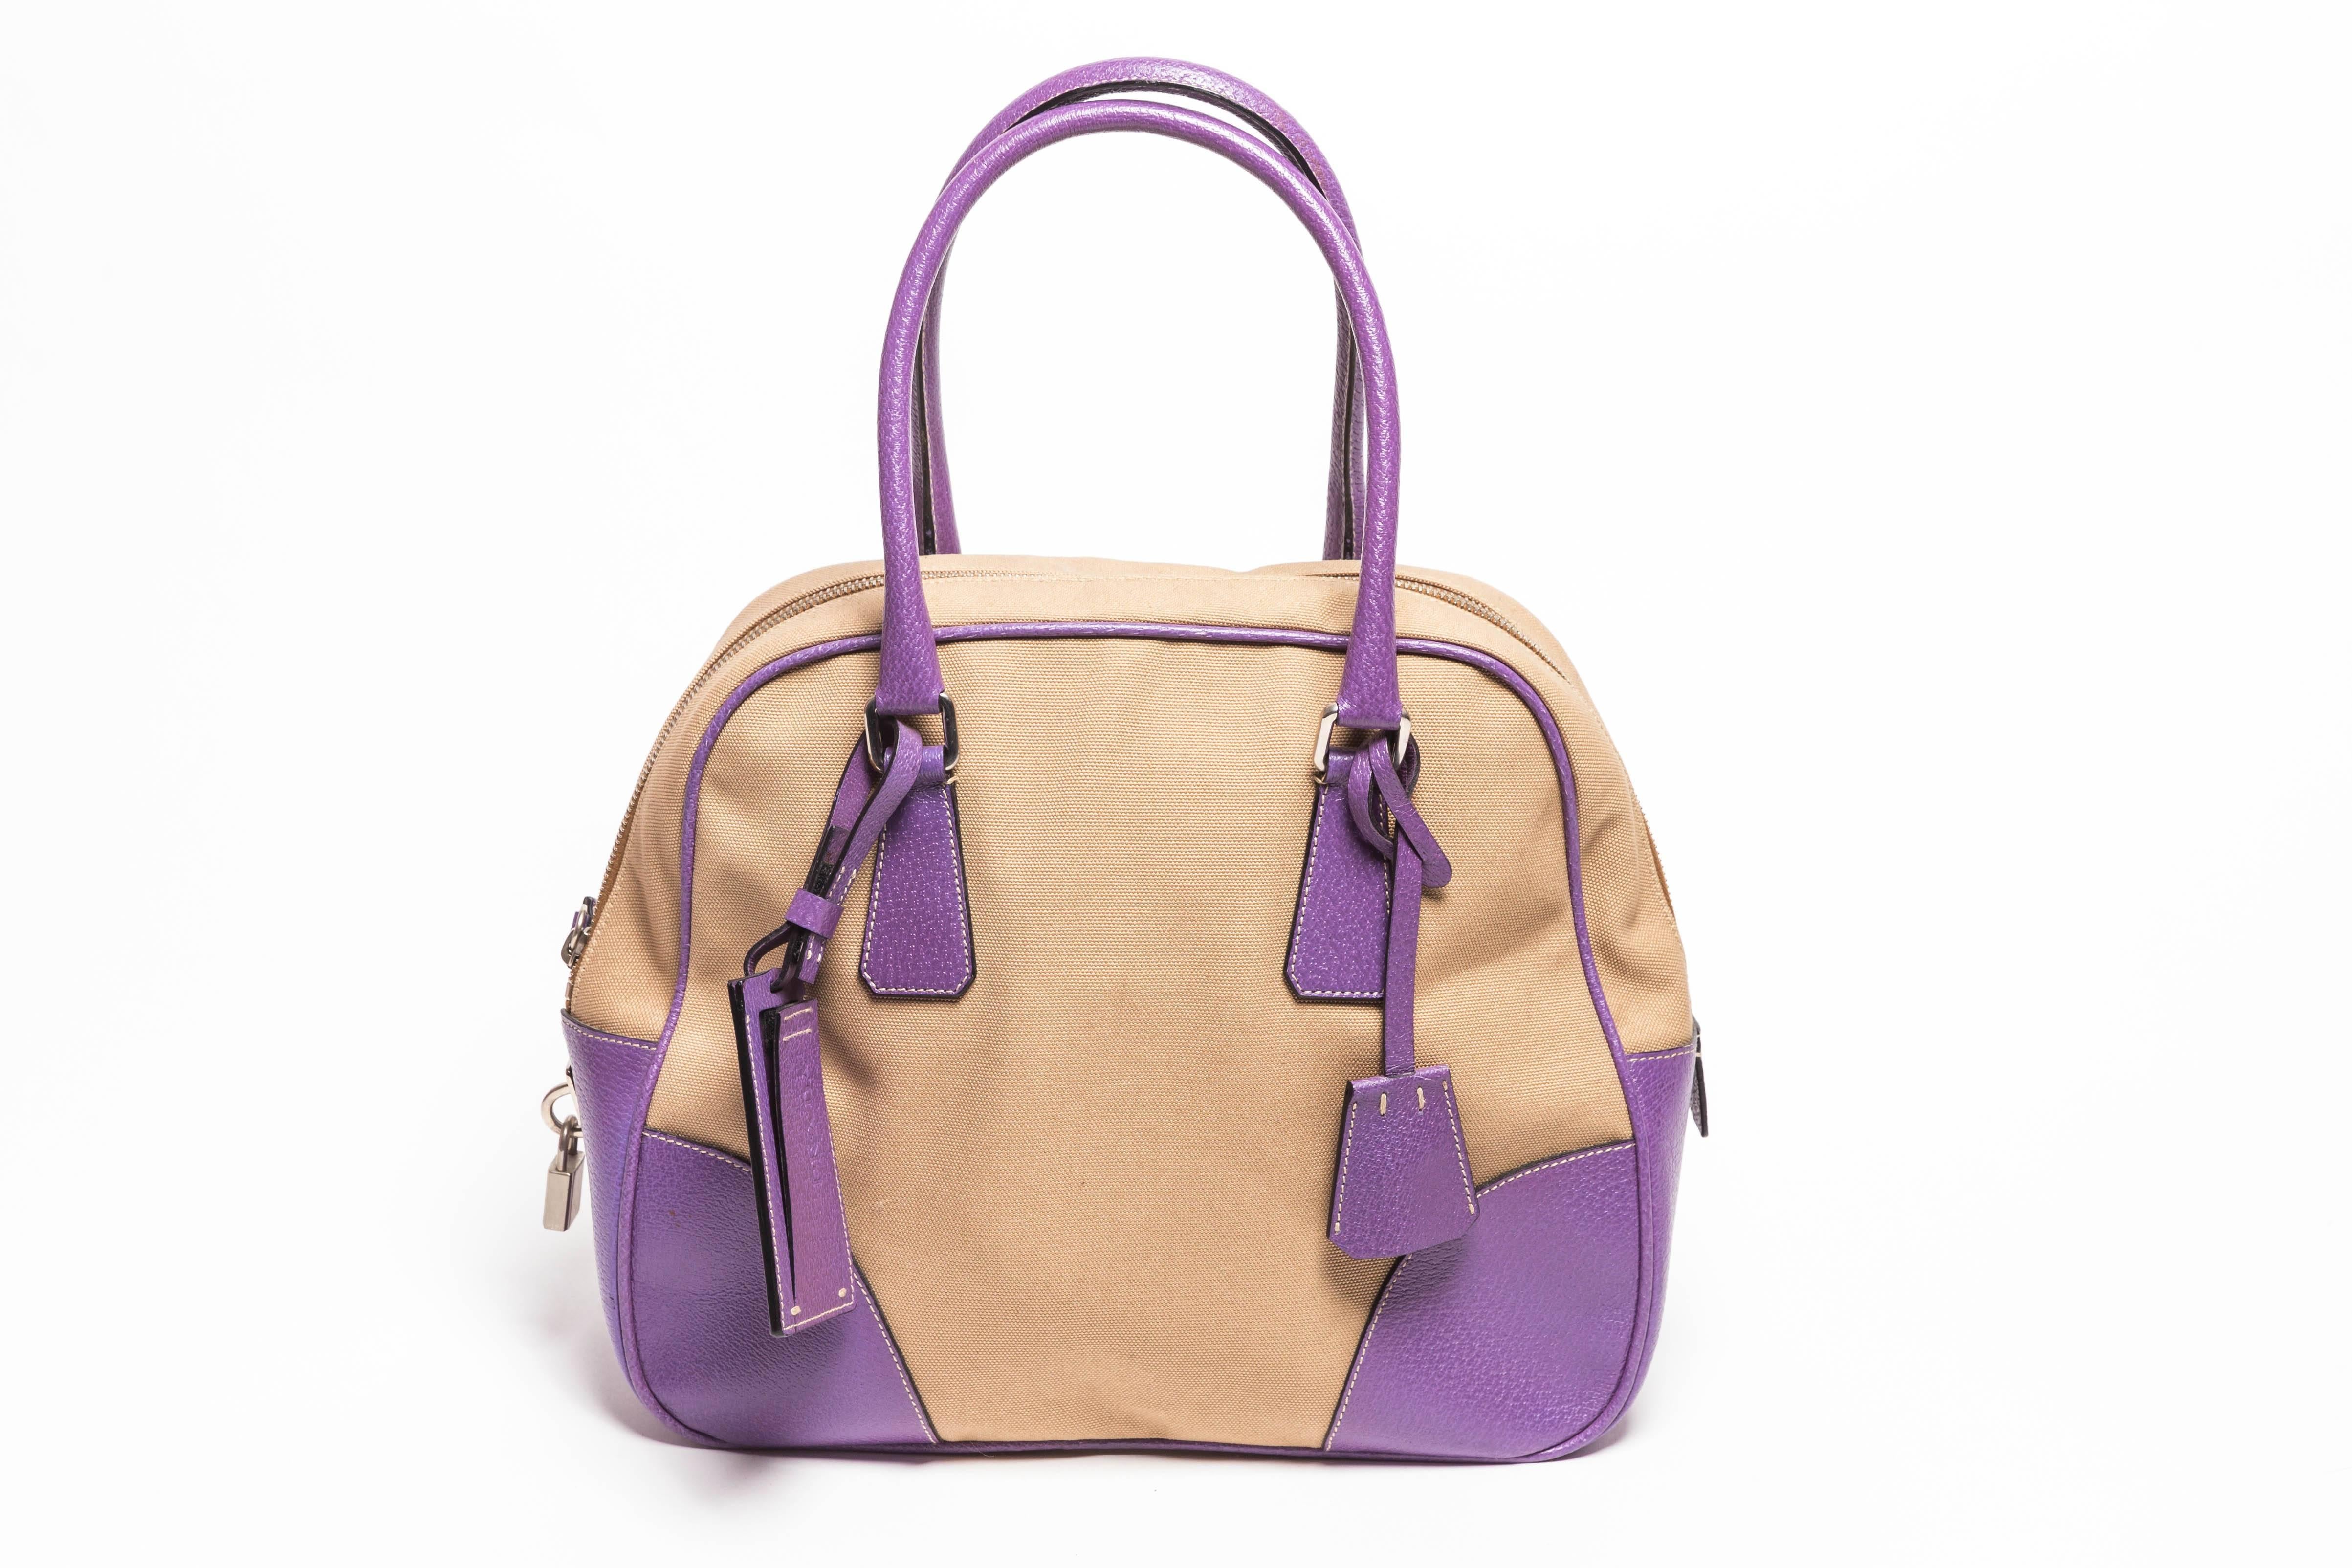 Fantastic Prada Canvas and Purple Leather Handbag with Lock, Keys and Luggage Tag
Condition is Very Good with Barely Visible Scuffs to One Corner and One Small Mark to Canvas
Canvas is Very Clean
Lined in Purple Silk with One Interior Zipper